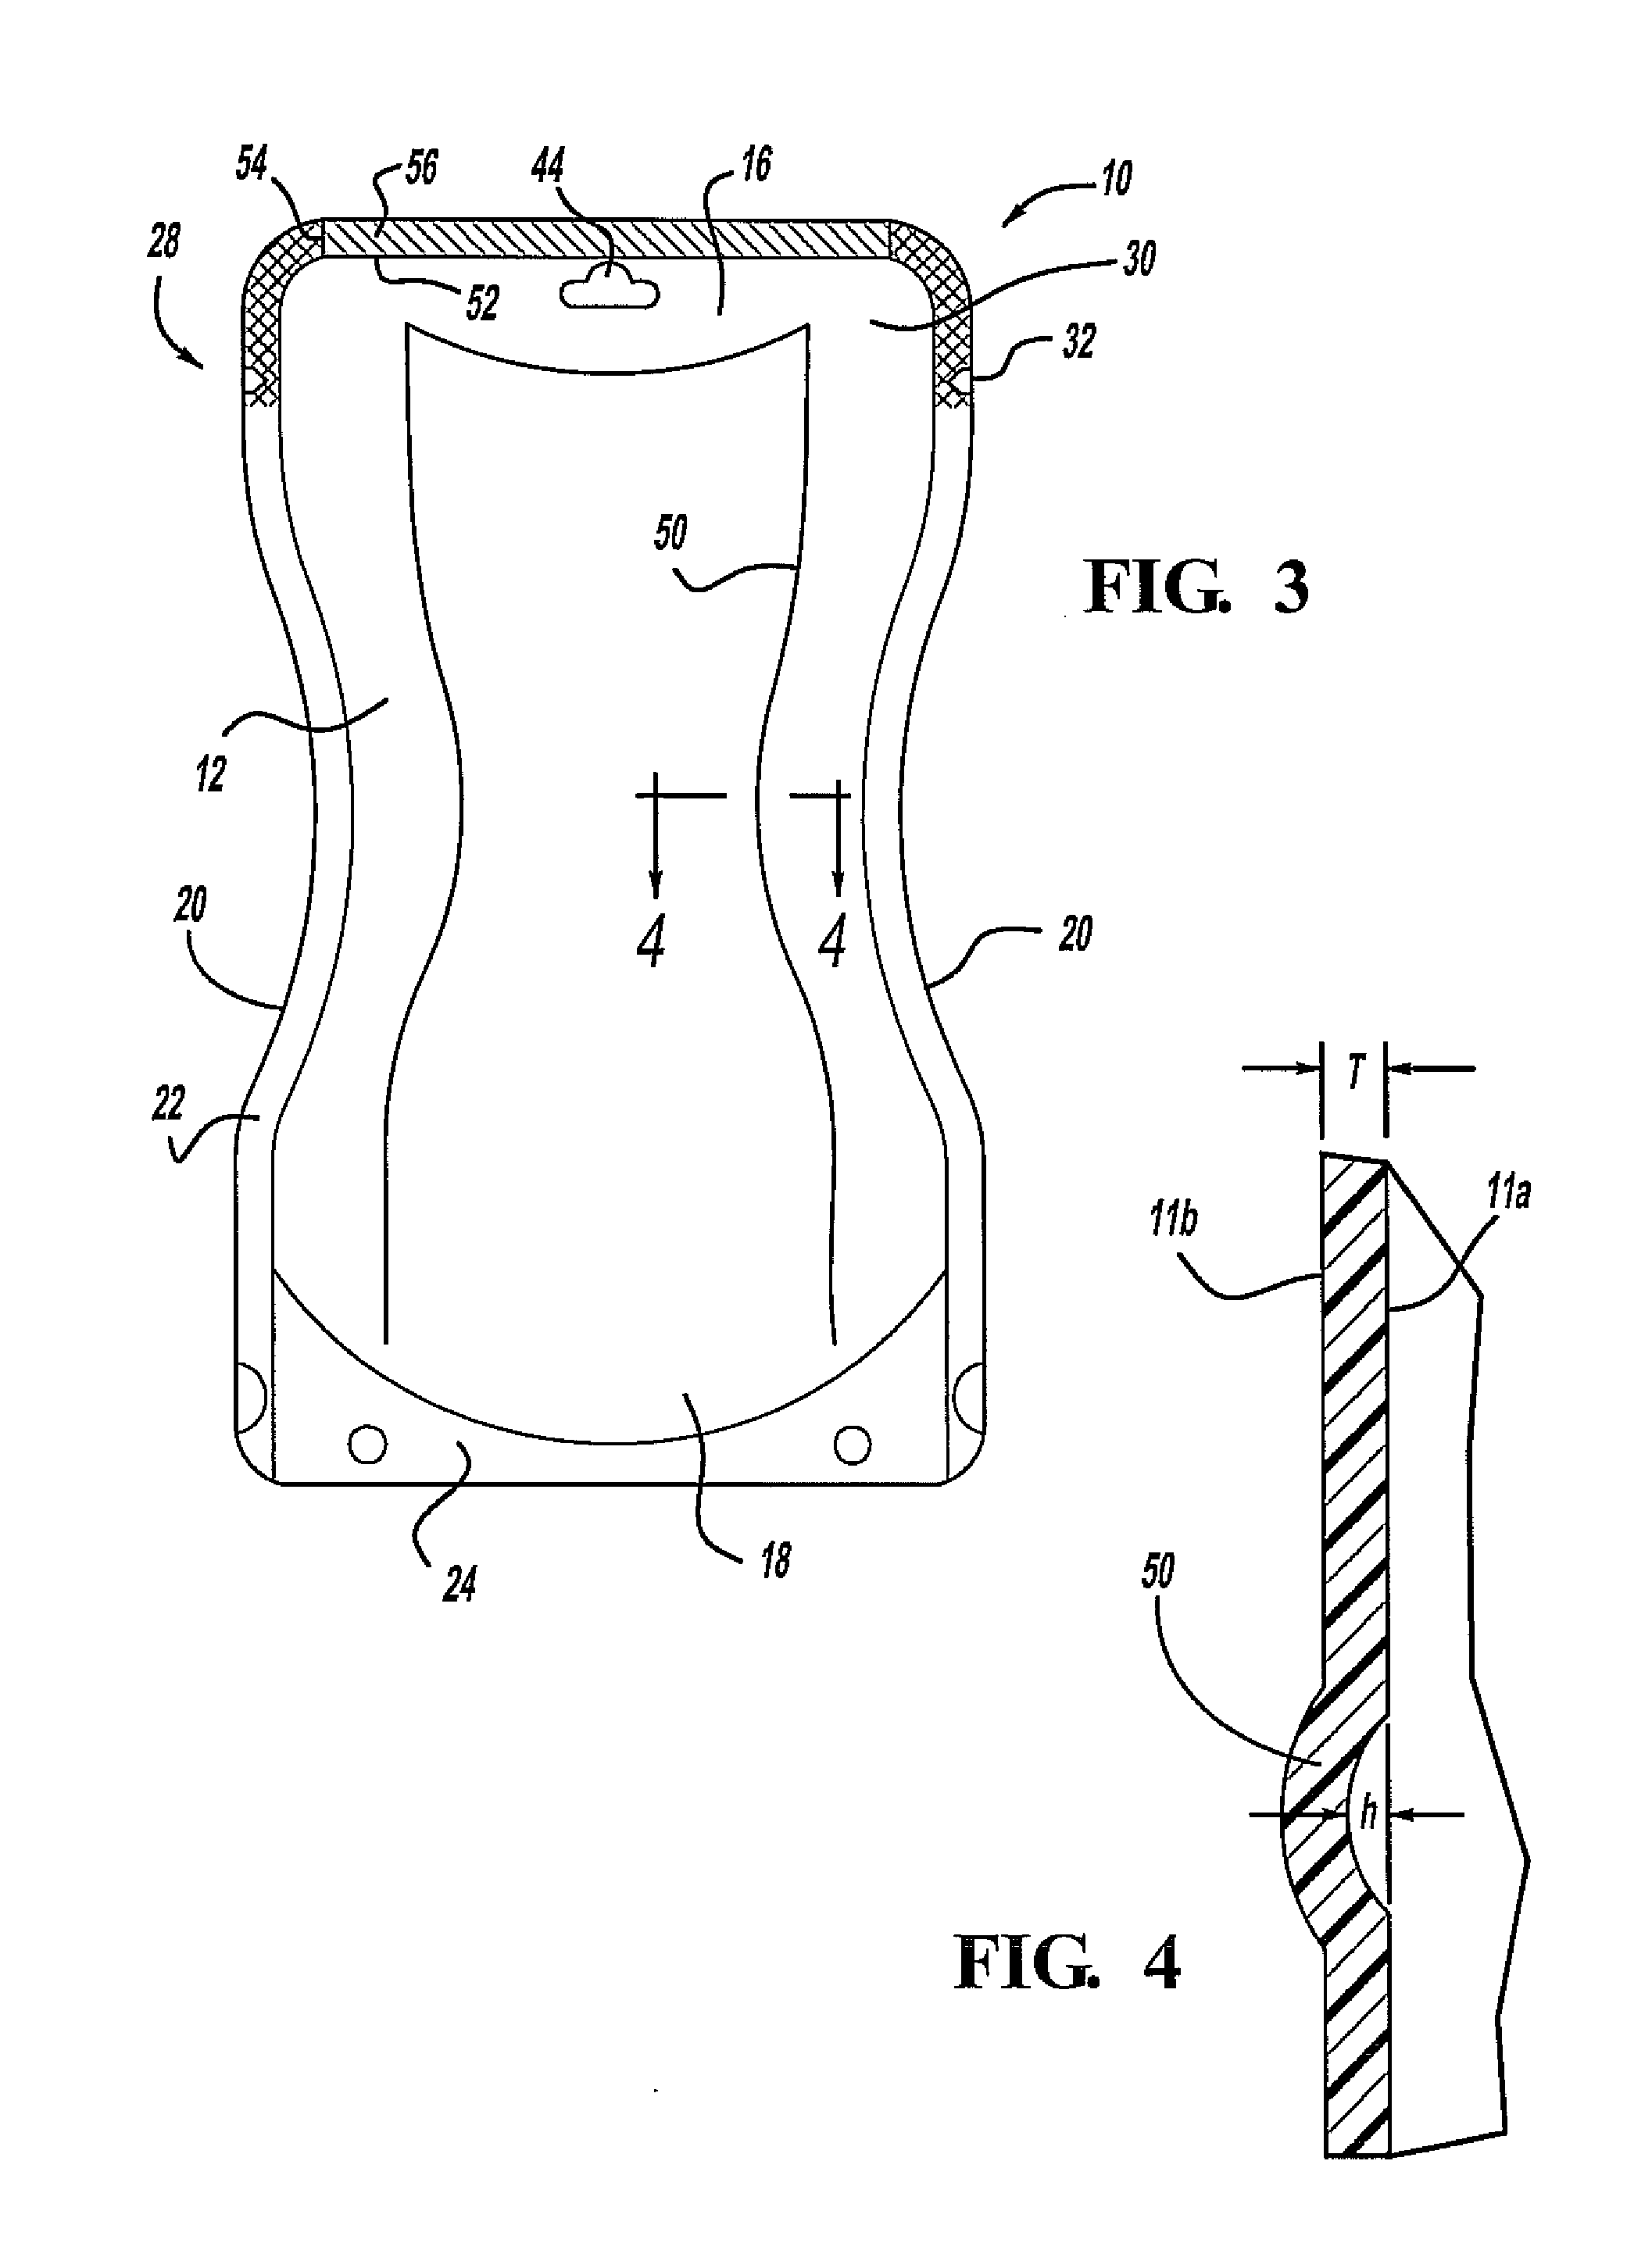 Stand-up flexible pouch and method of forming